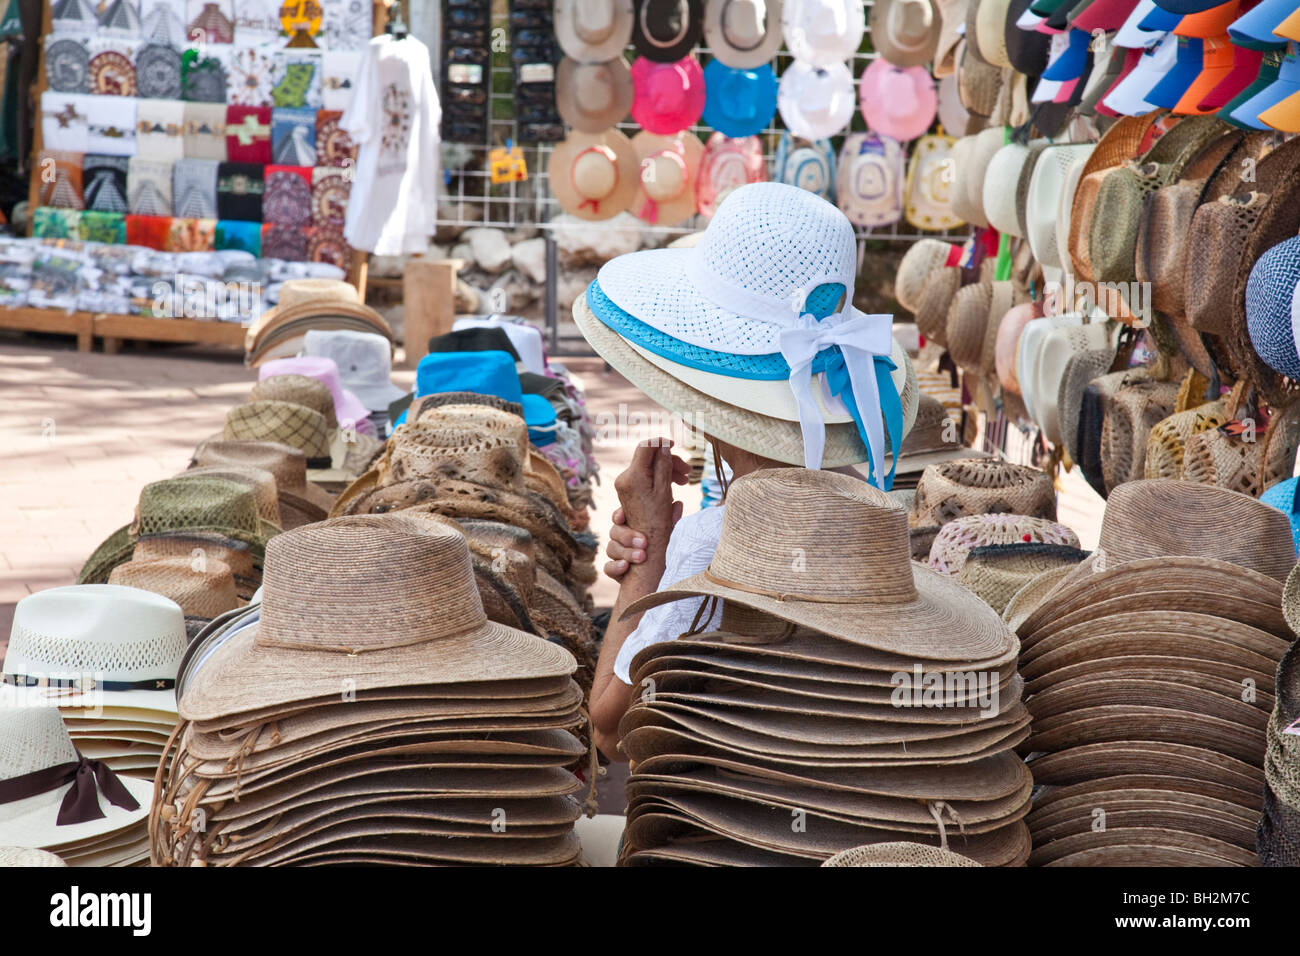 Souvenir stall selling traditional hats at the entrance of Chichen Itza Archaeological Site Yucatan Mexico. Stock Photo